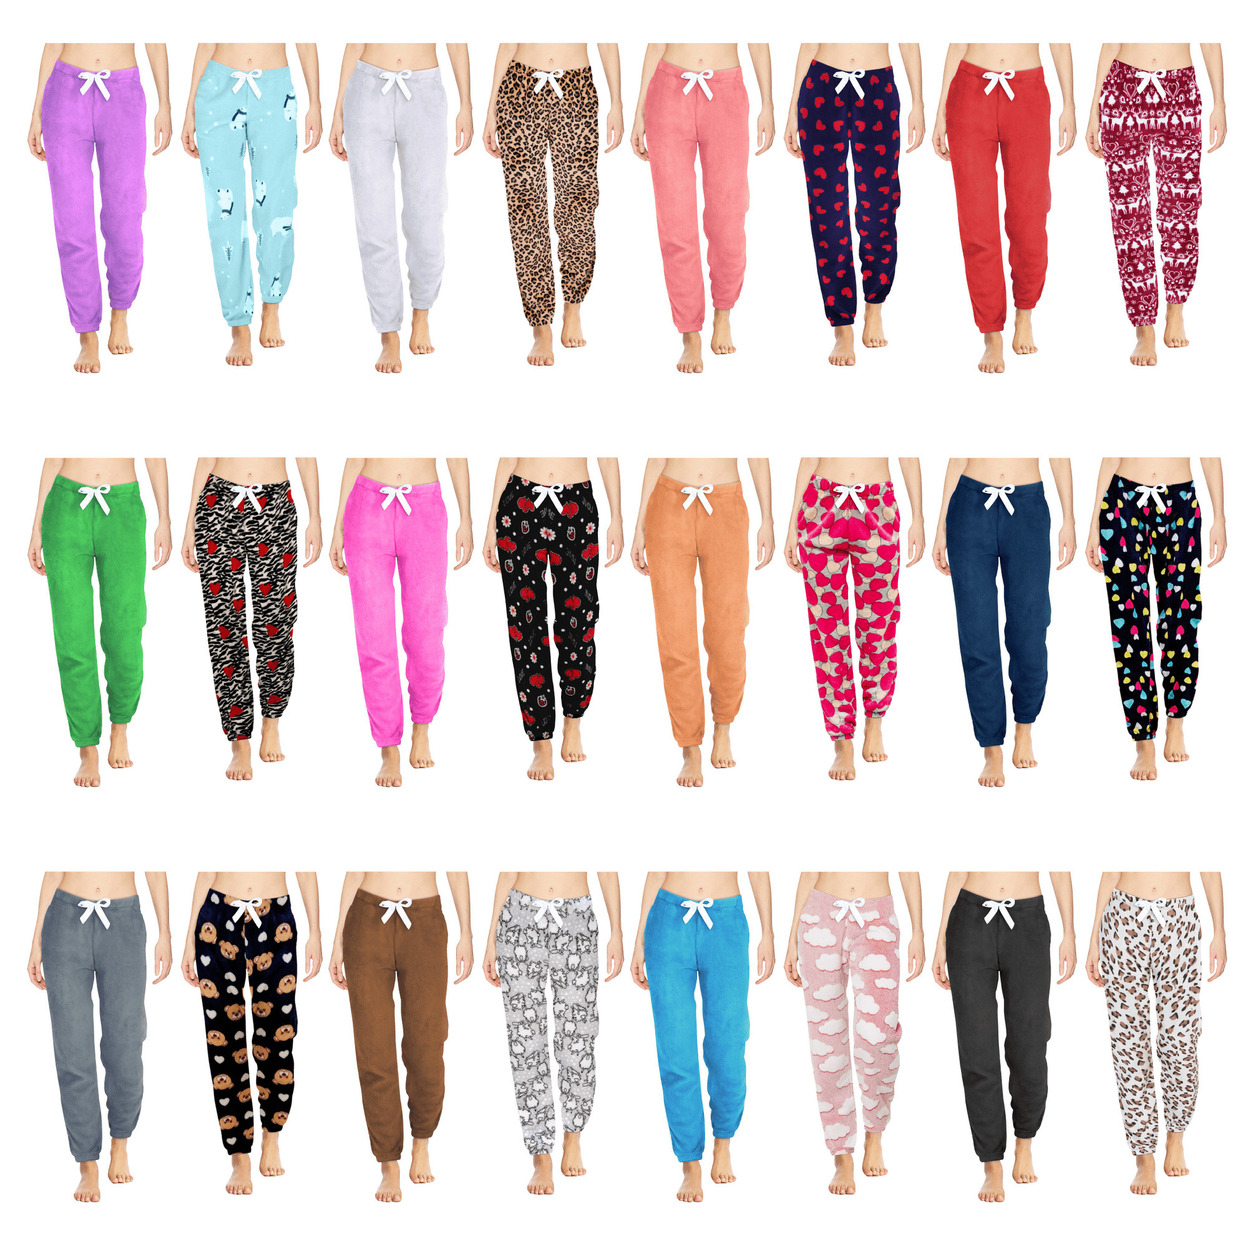 Multi-Pack: Women's Solid & Printed Ultra-Soft Comfy Stretch Micro-Fleece Pajama Lounge Pants - 1-pack, Medium, Shapes